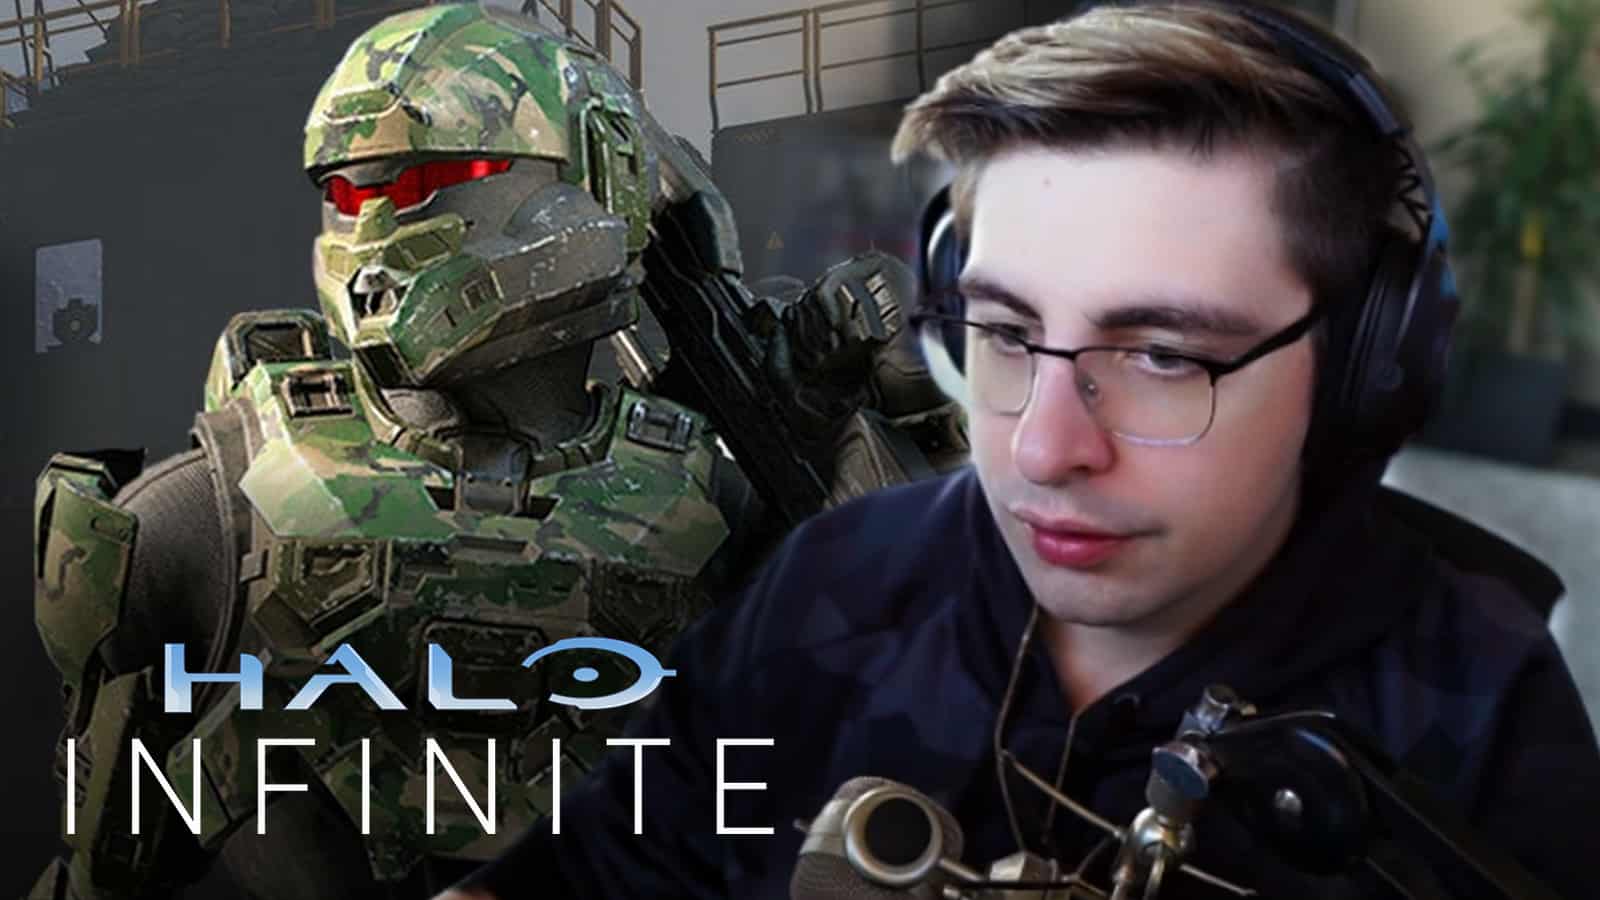 Shroud next to Spartan from Halo Infinite.